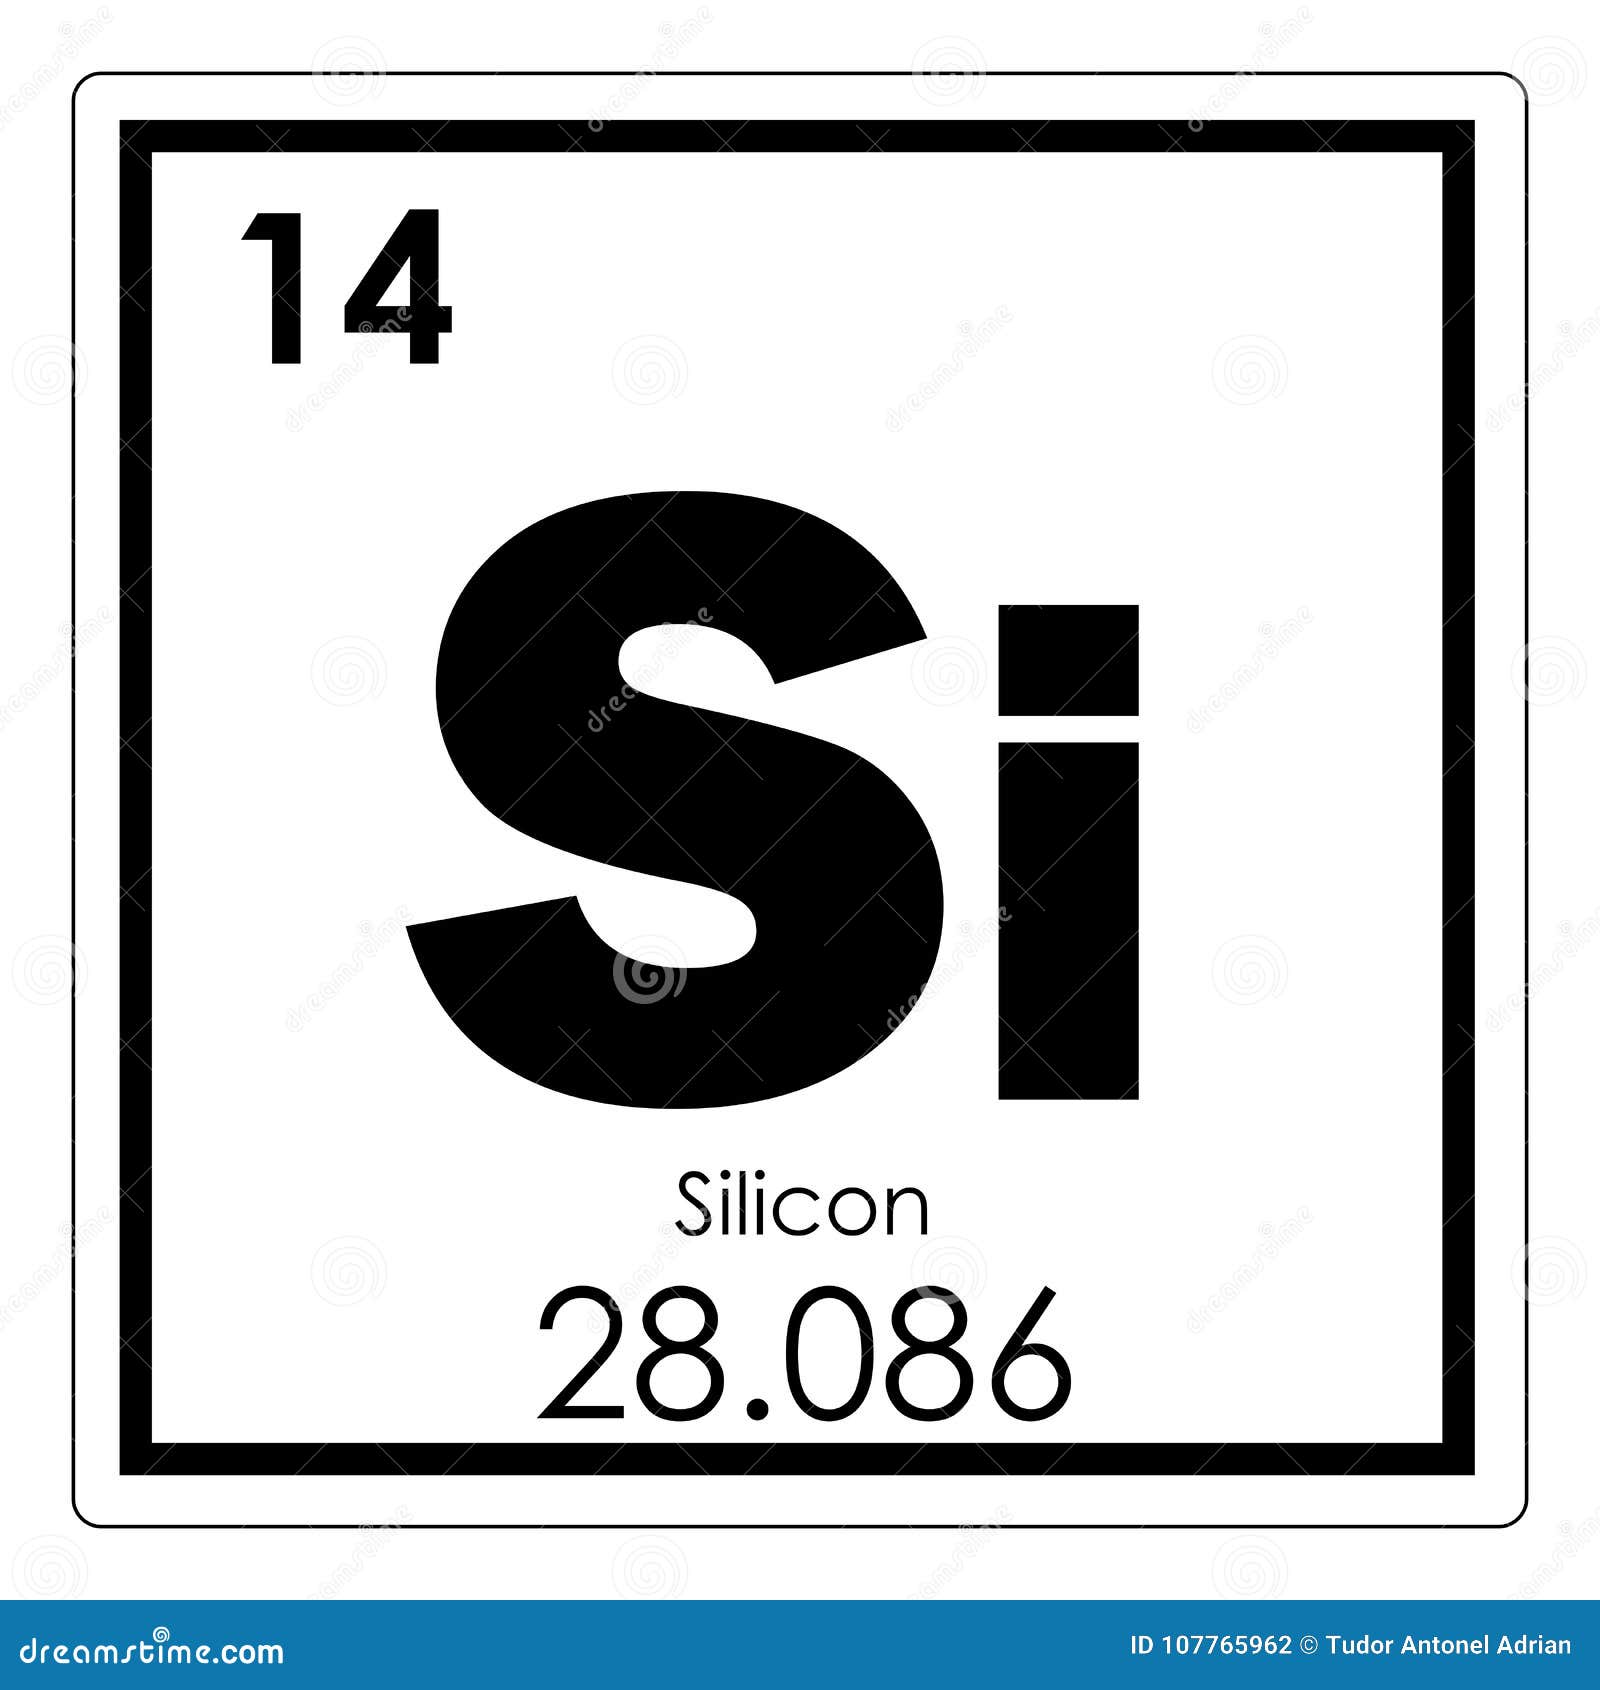 Silicon chemical element stock Illustration of science - 107765962